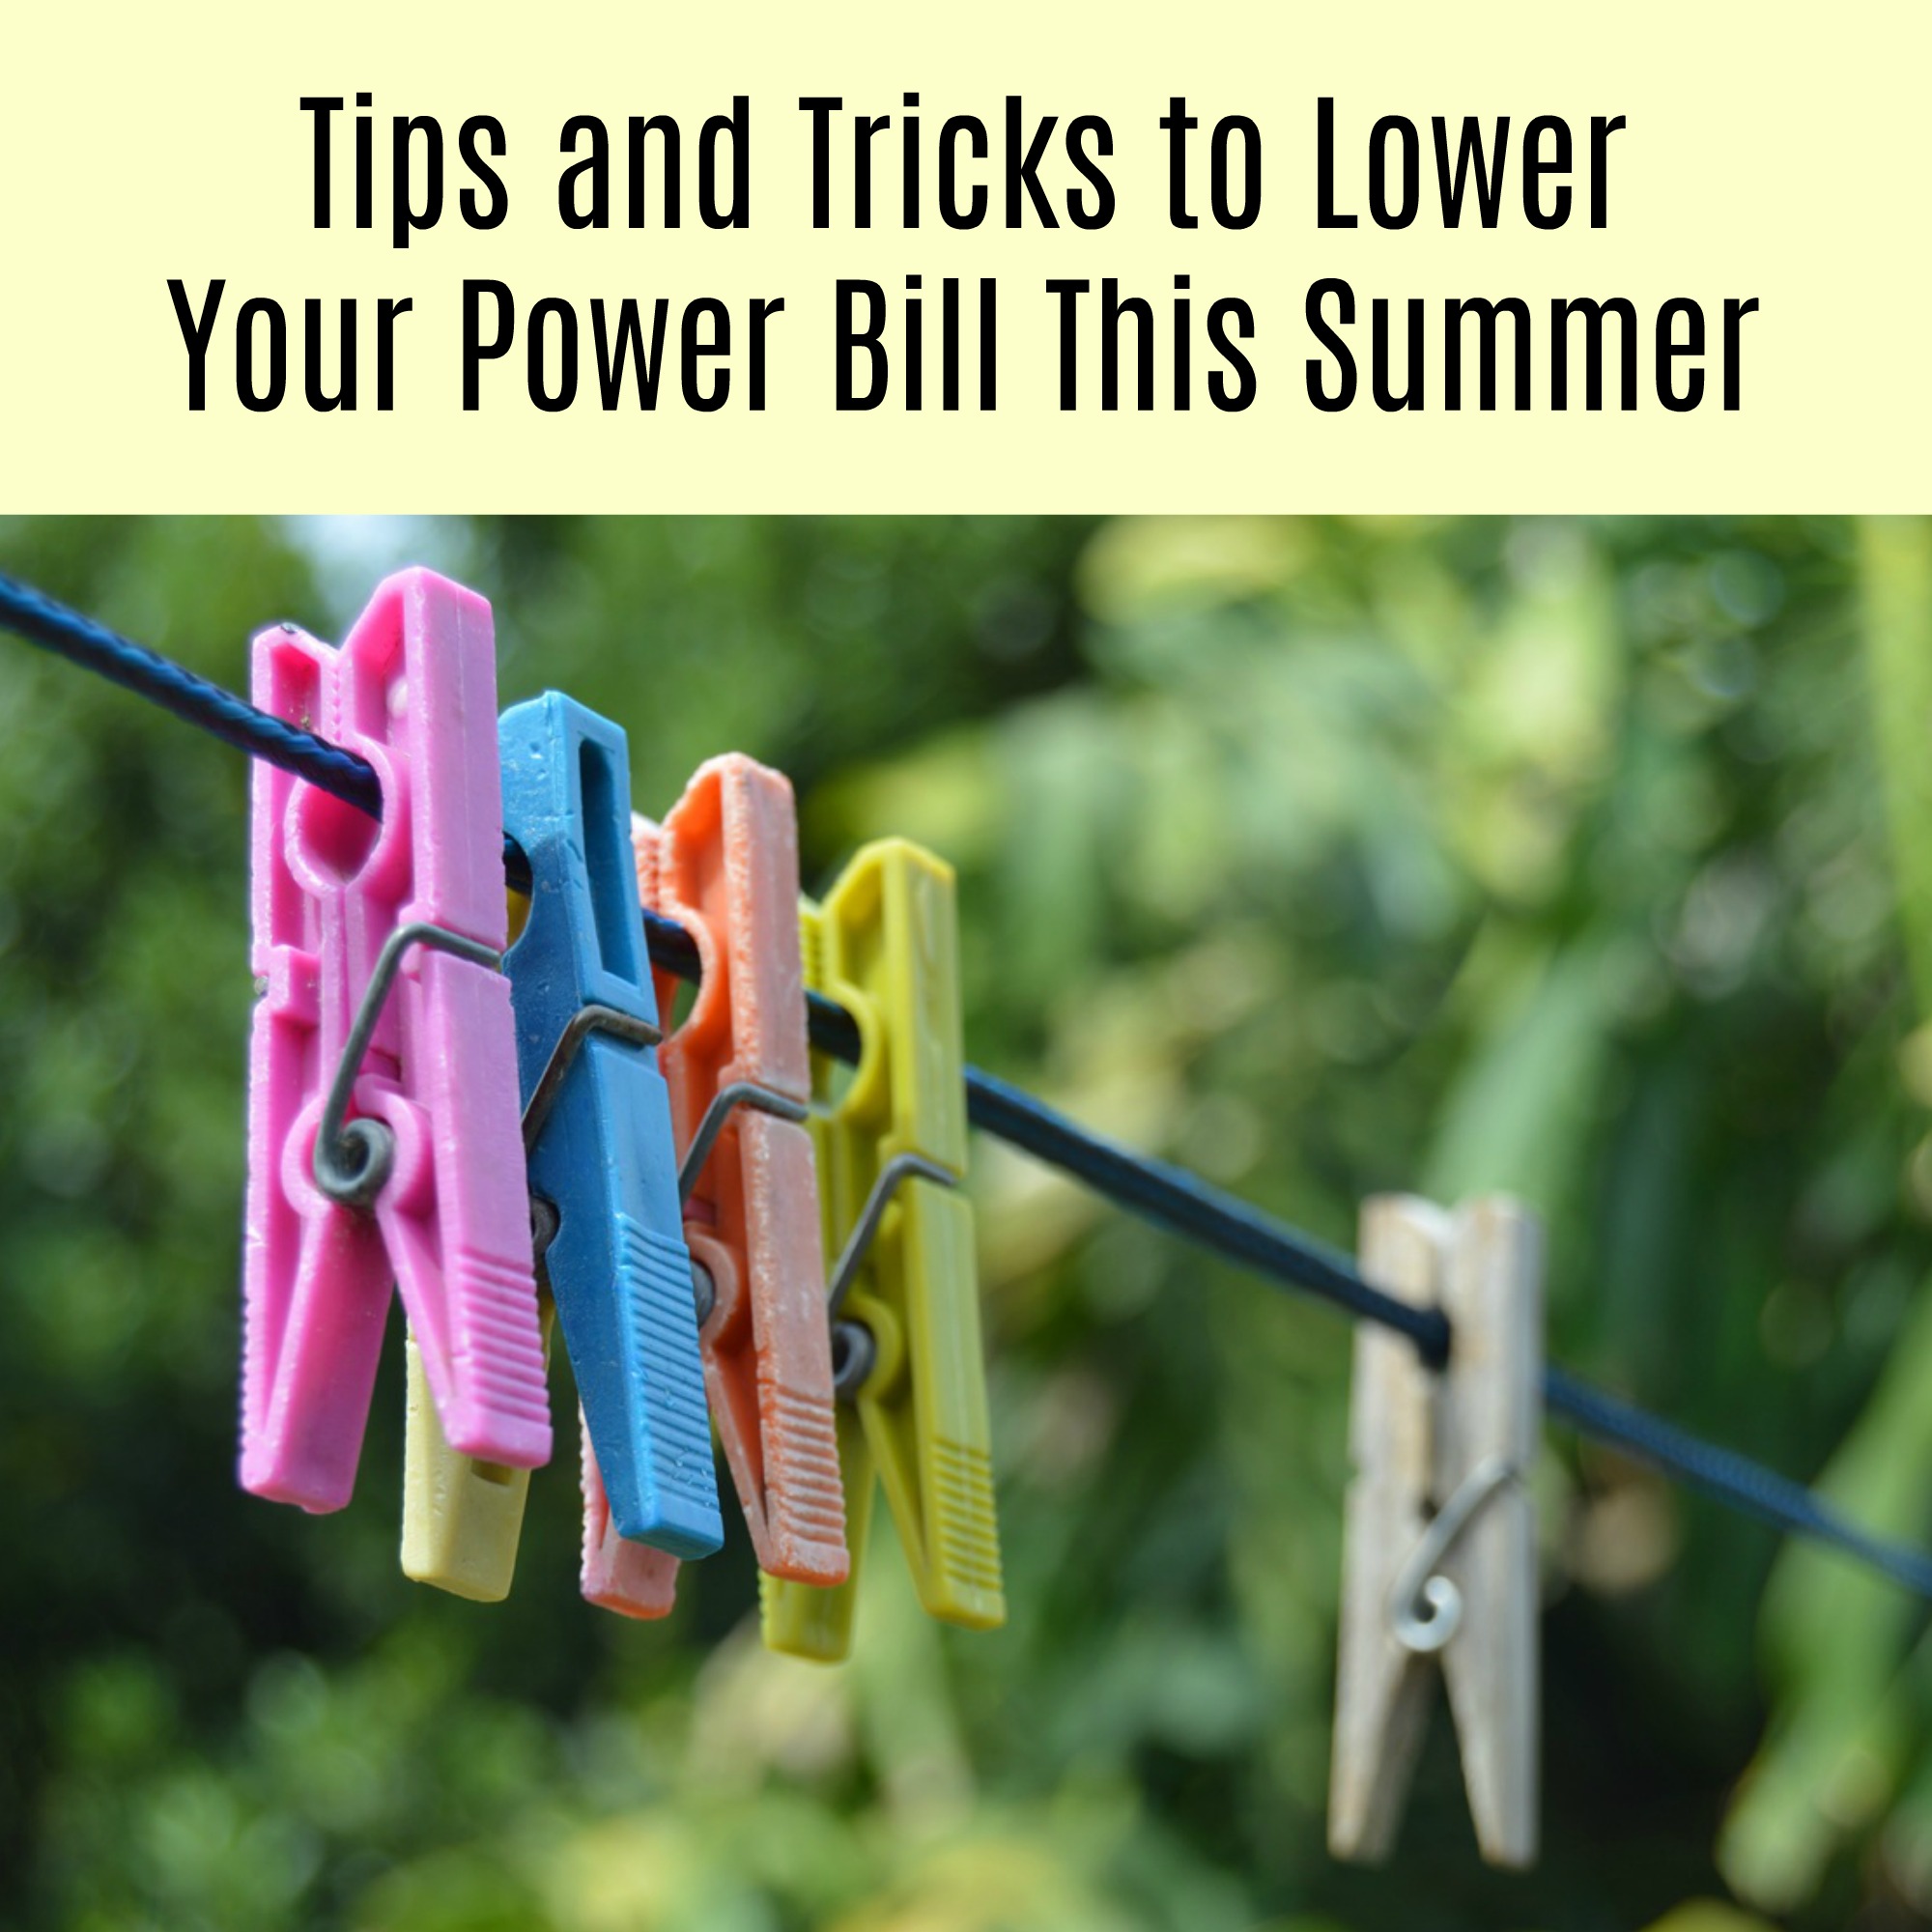 Tips and Tricks to Lower Your Power Bill This Summer